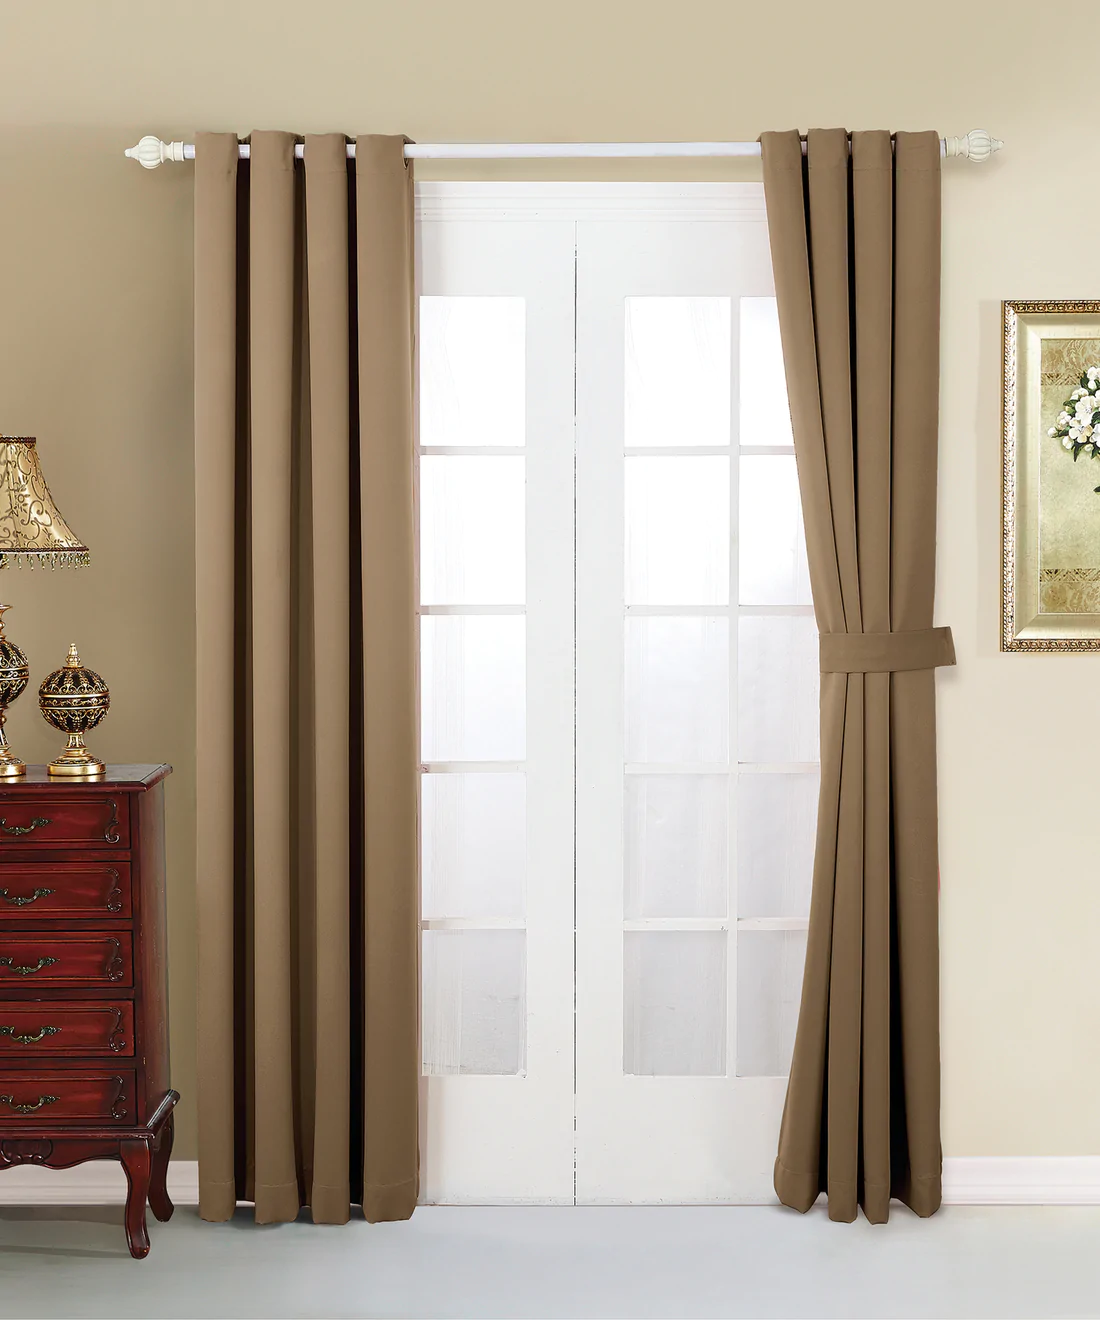 7 Smart Ways Designers Use Curtains and *Not* on Windows